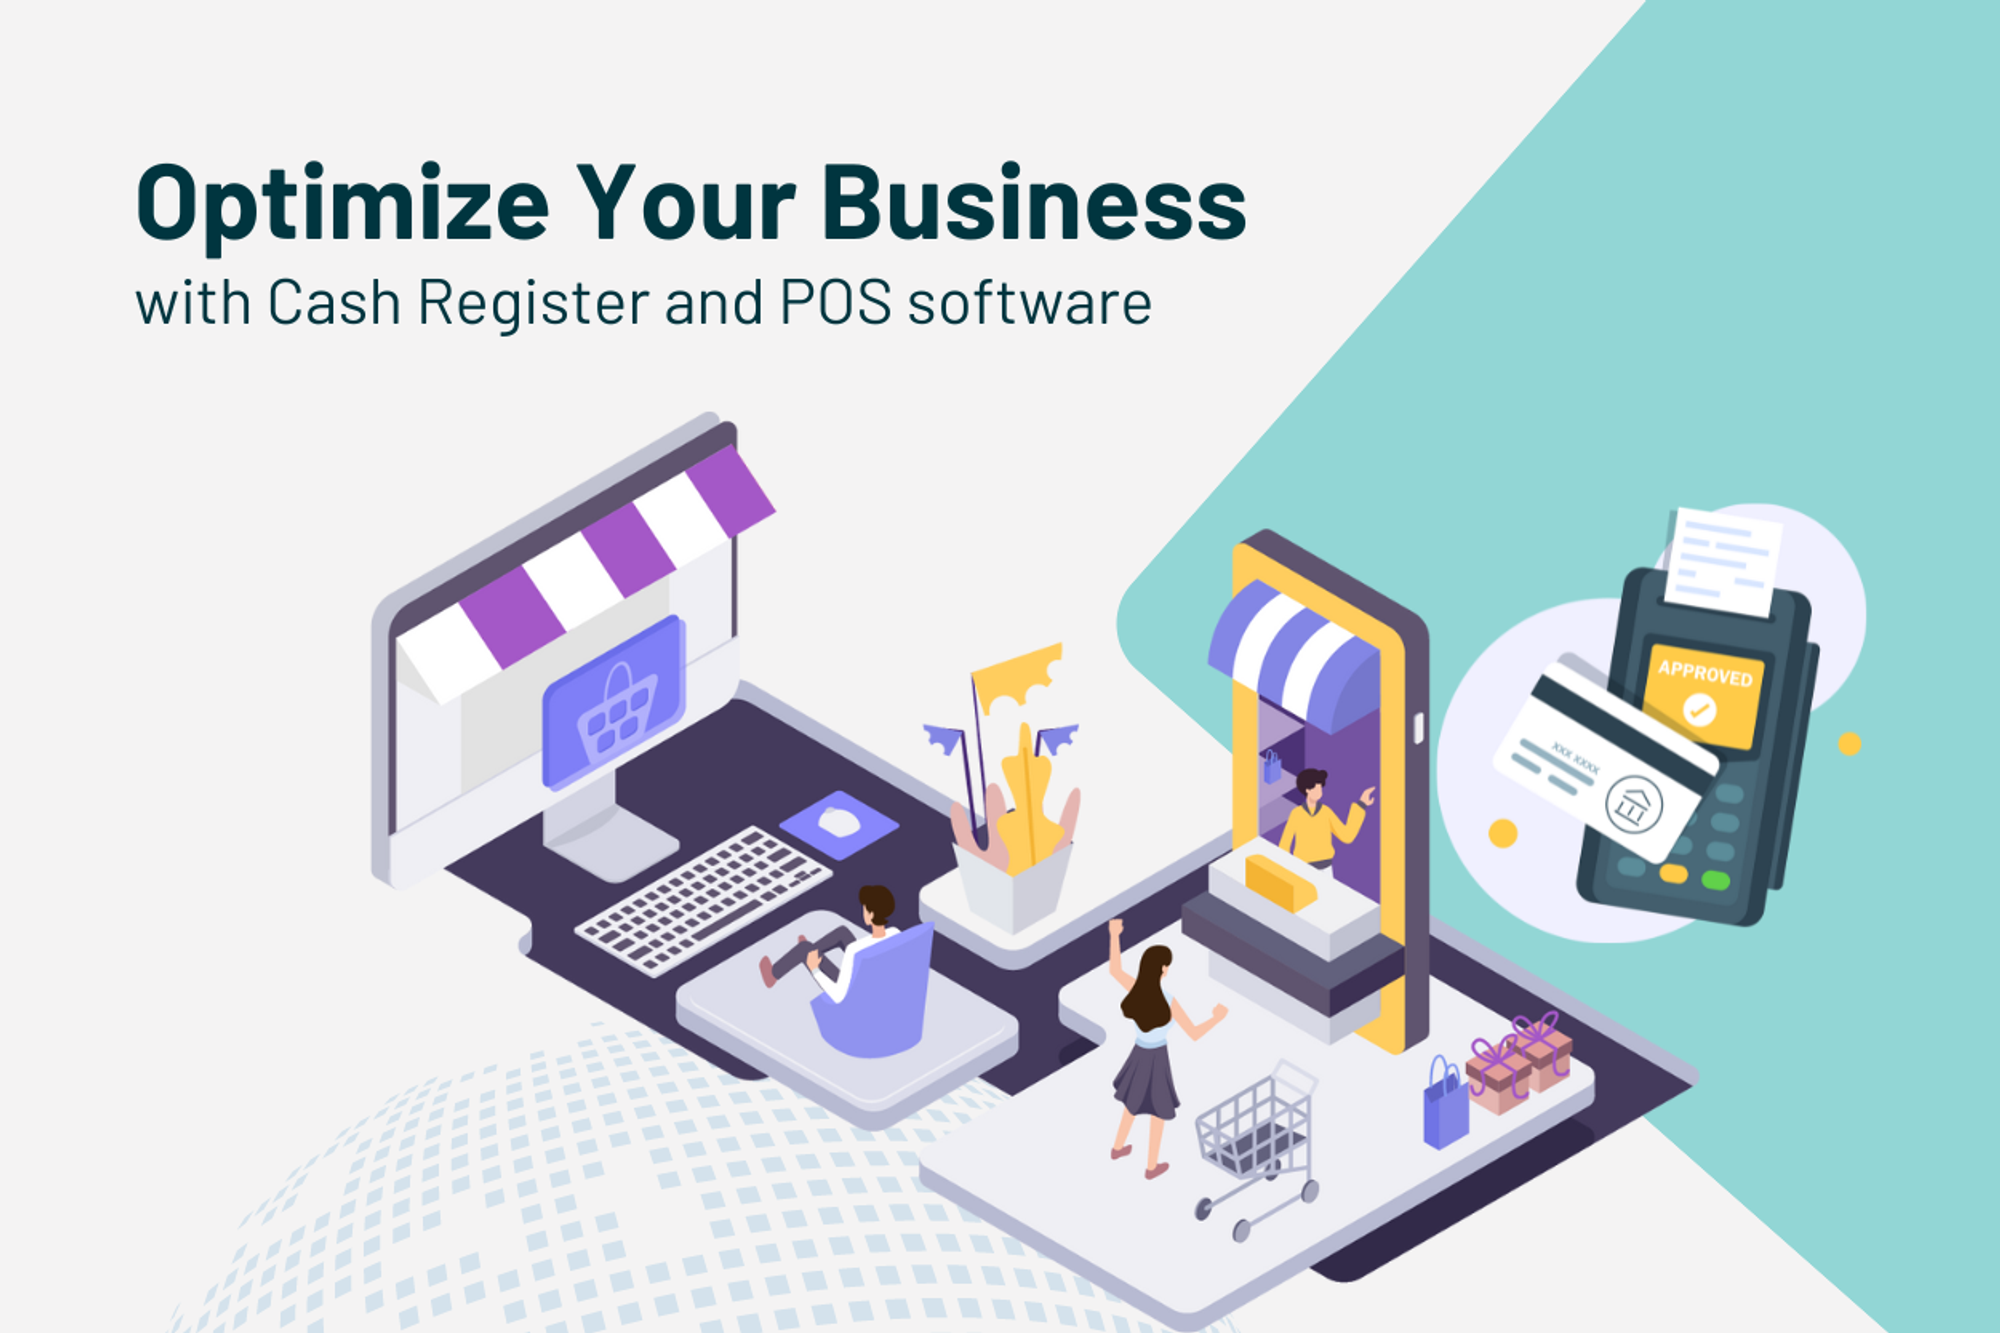 Optimize your business with cash register and POS software